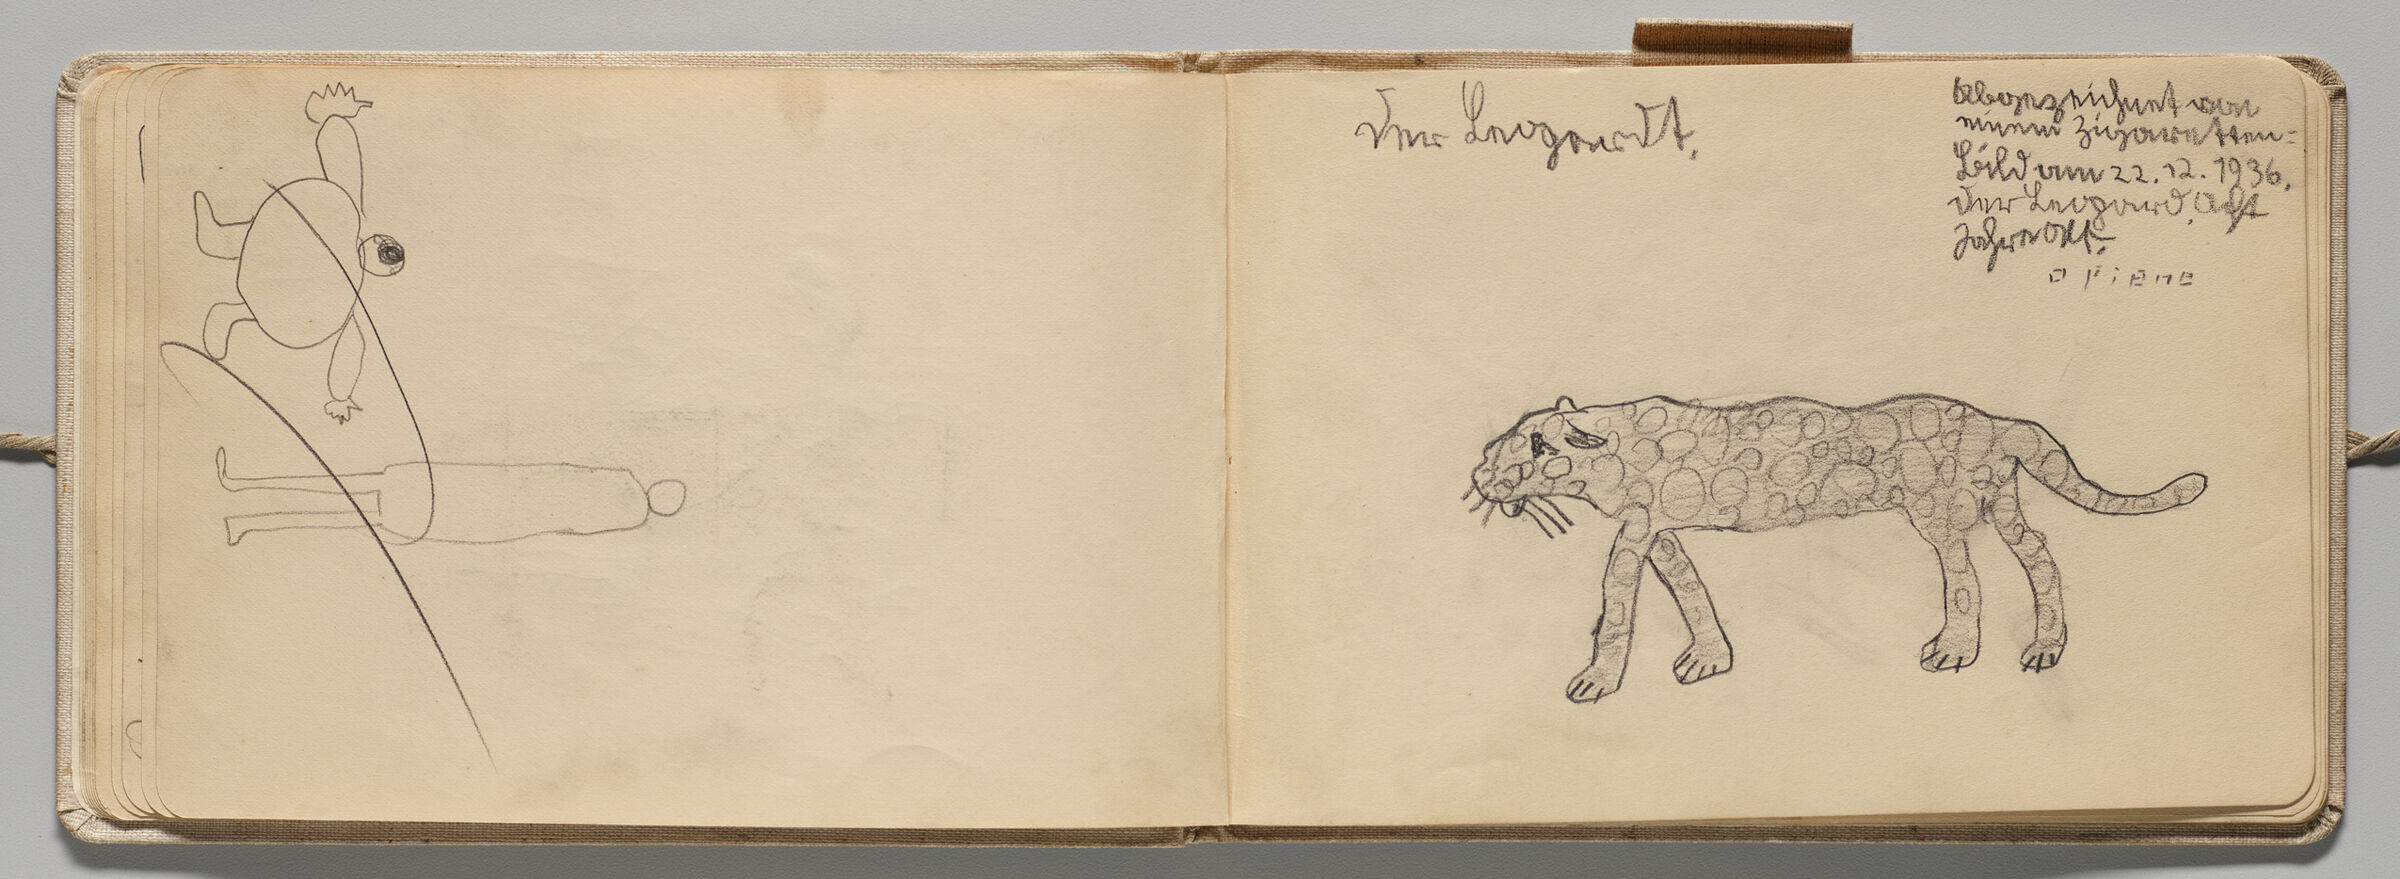 Untitled (Female And Male Figures, Crossed Out, Left Page); Untitled (Jaguar, Right Page)